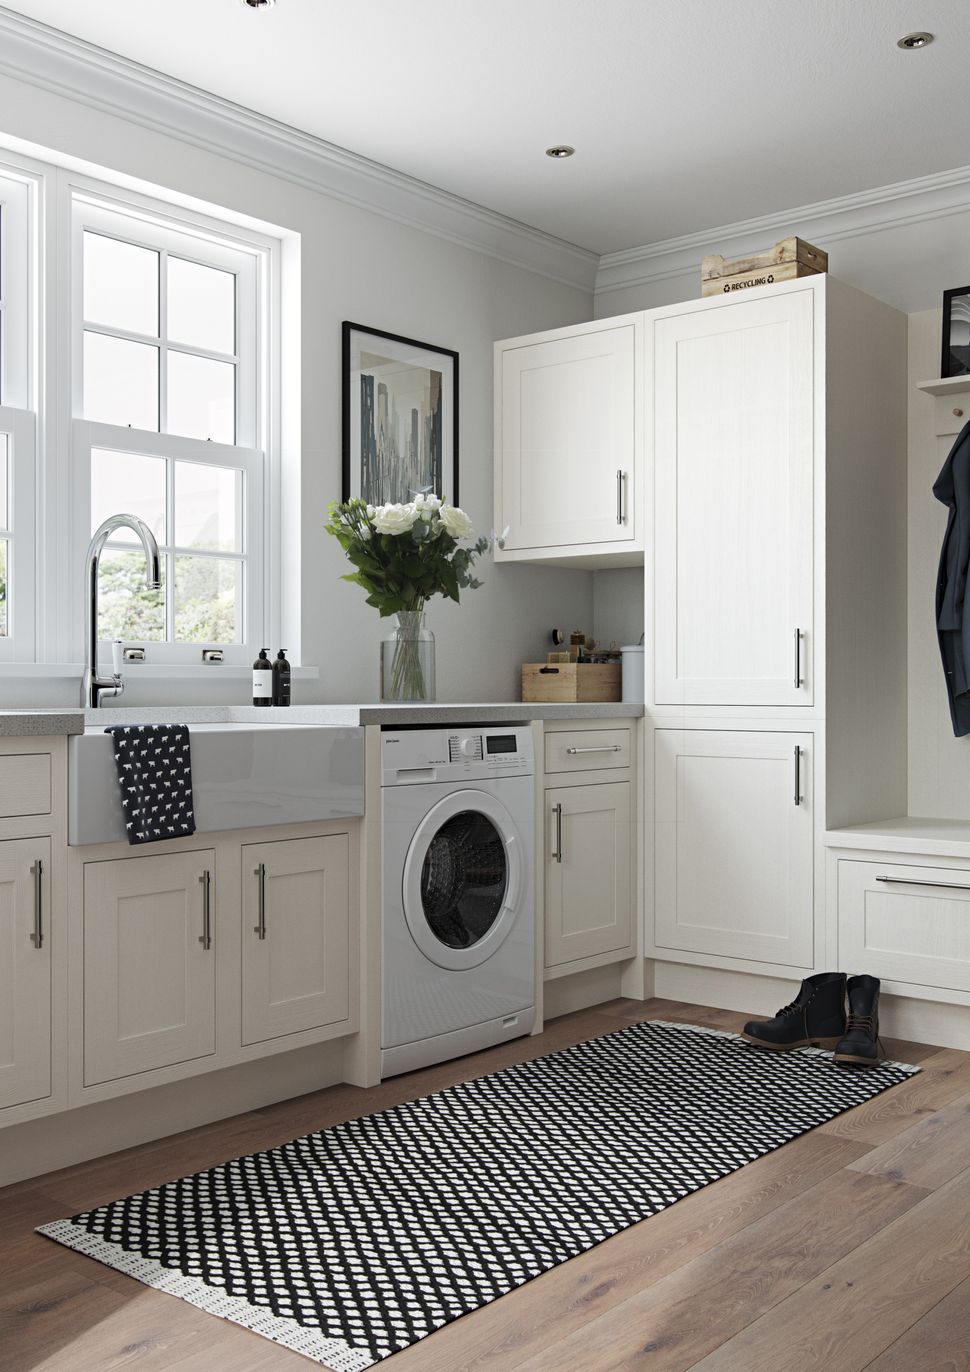 Utility Room Flooring Ideas: Top Choices for Laundry Rooms | Homebuilding